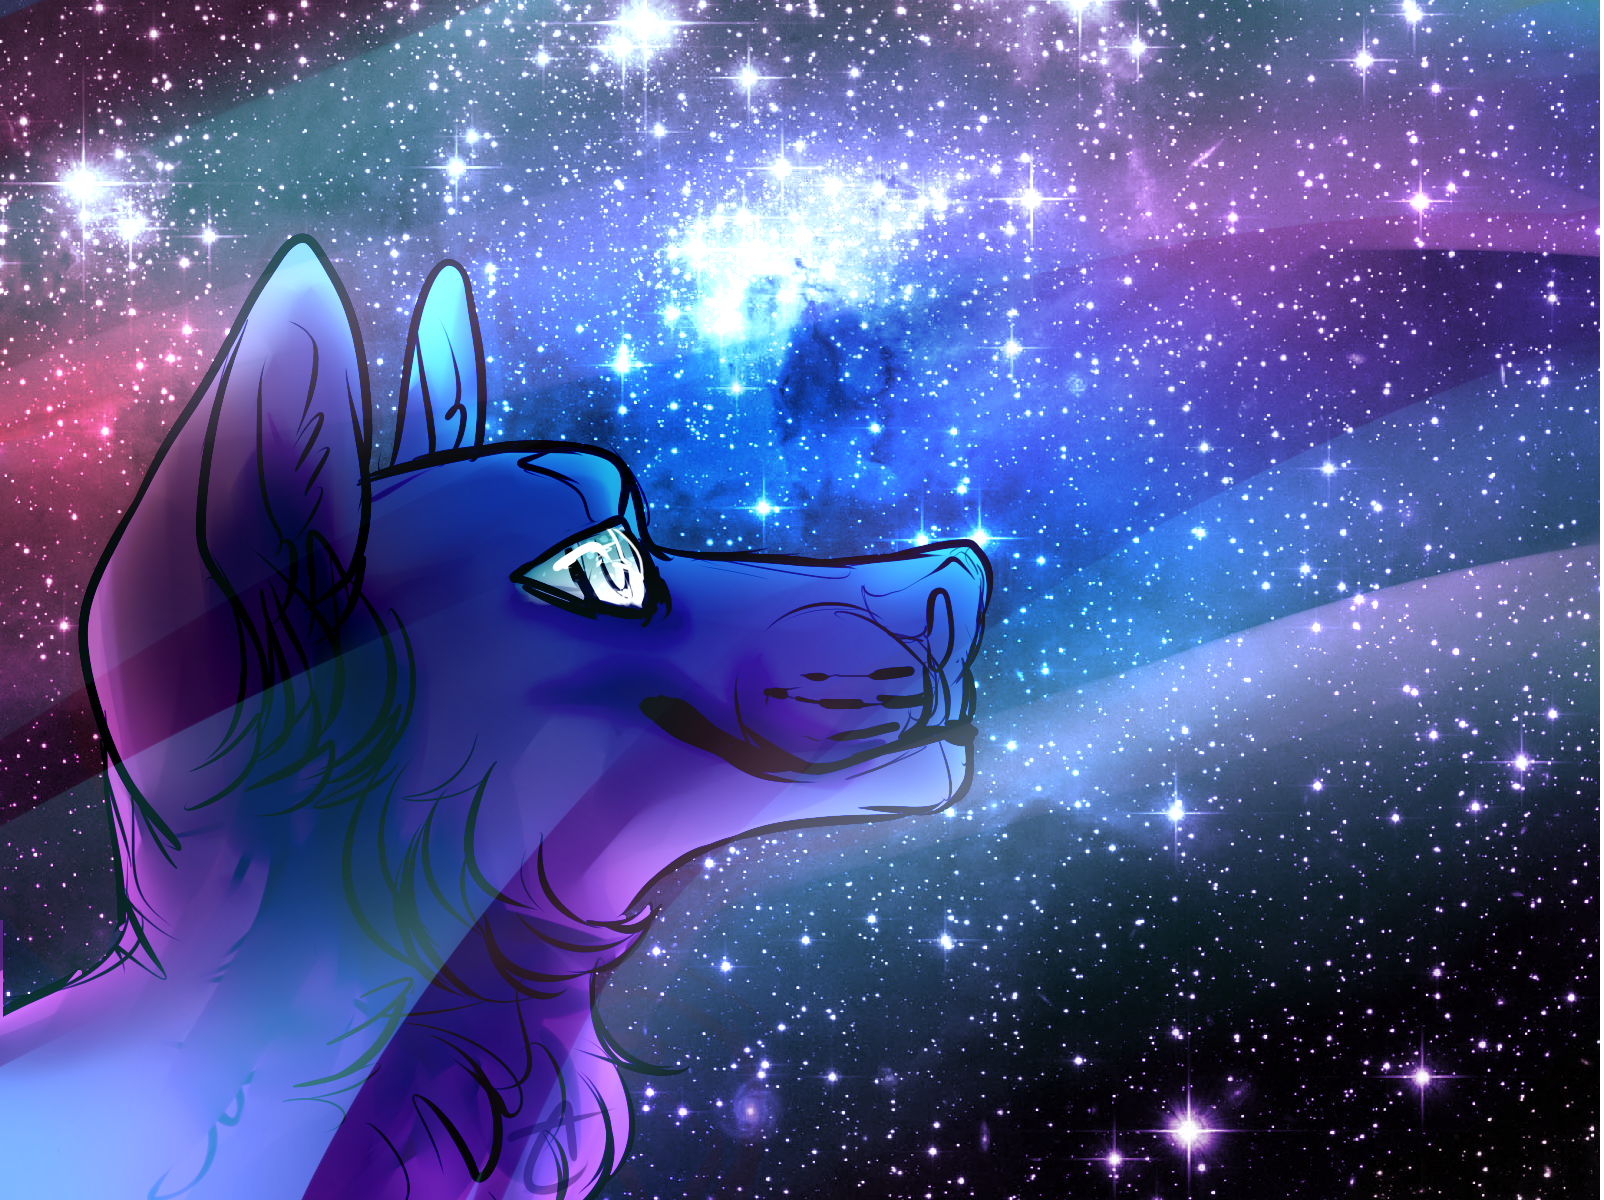 space_doggo_thing_by_crionym-dabawzq.png